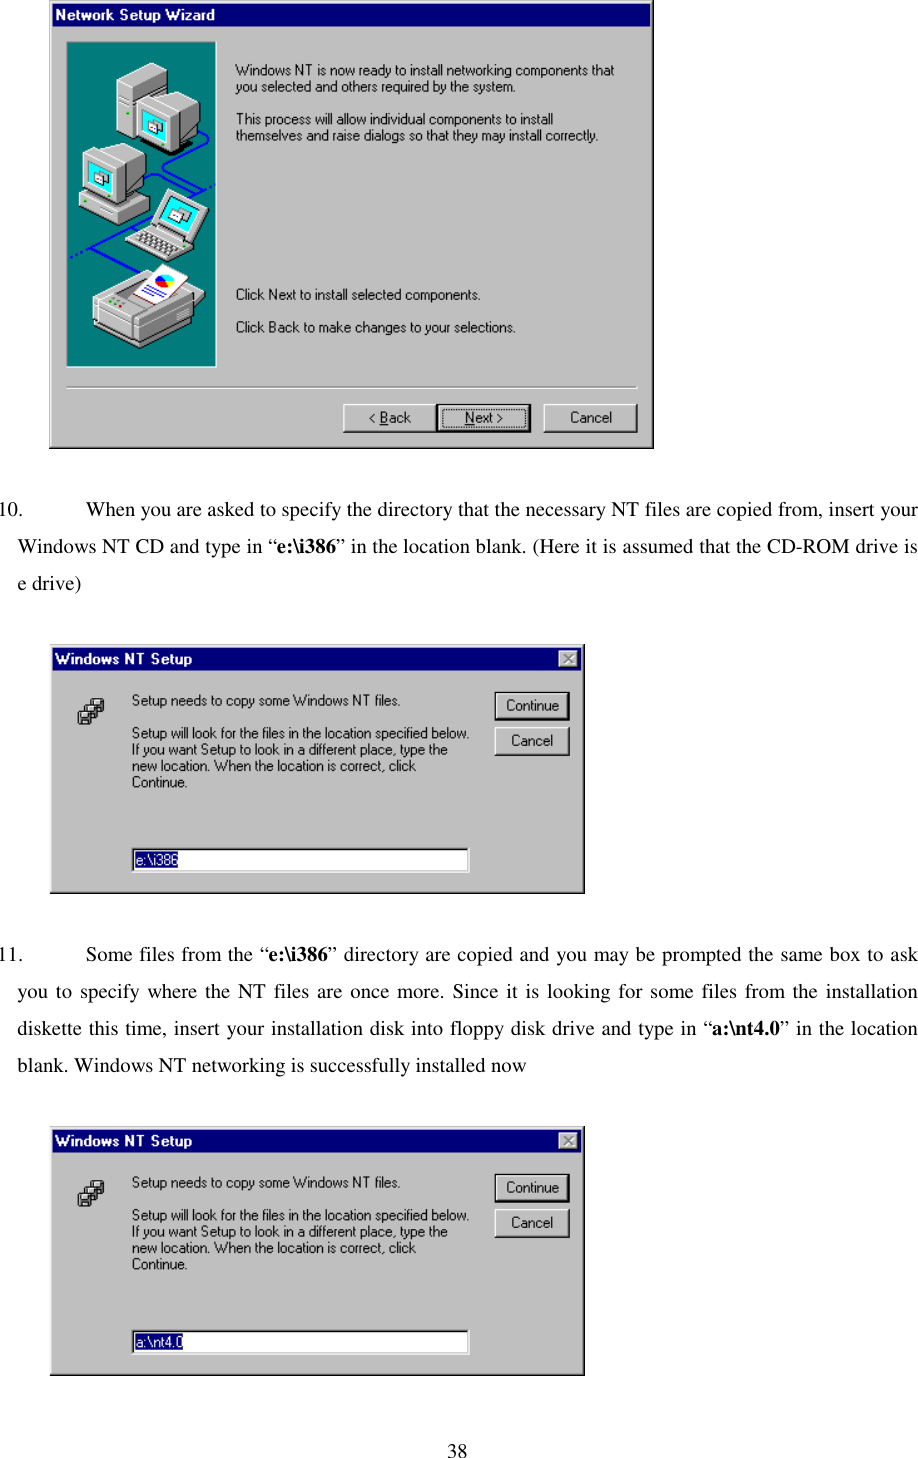   38              10.  When you are asked to specify the directory that the necessary NT files are copied from, insert your Windows NT CD and type in “e:\i386” in the location blank. (Here it is assumed that the CD-ROM drive is e drive)               11.  Some files from the “e:\i386” directory are copied and you may be prompted the same box to ask you to specify where the NT files are once more. Since it is looking for some files from the installation diskette this time, insert your installation disk into floppy disk drive and type in “a:\nt4.0” in the location blank. Windows NT networking is successfully installed now               